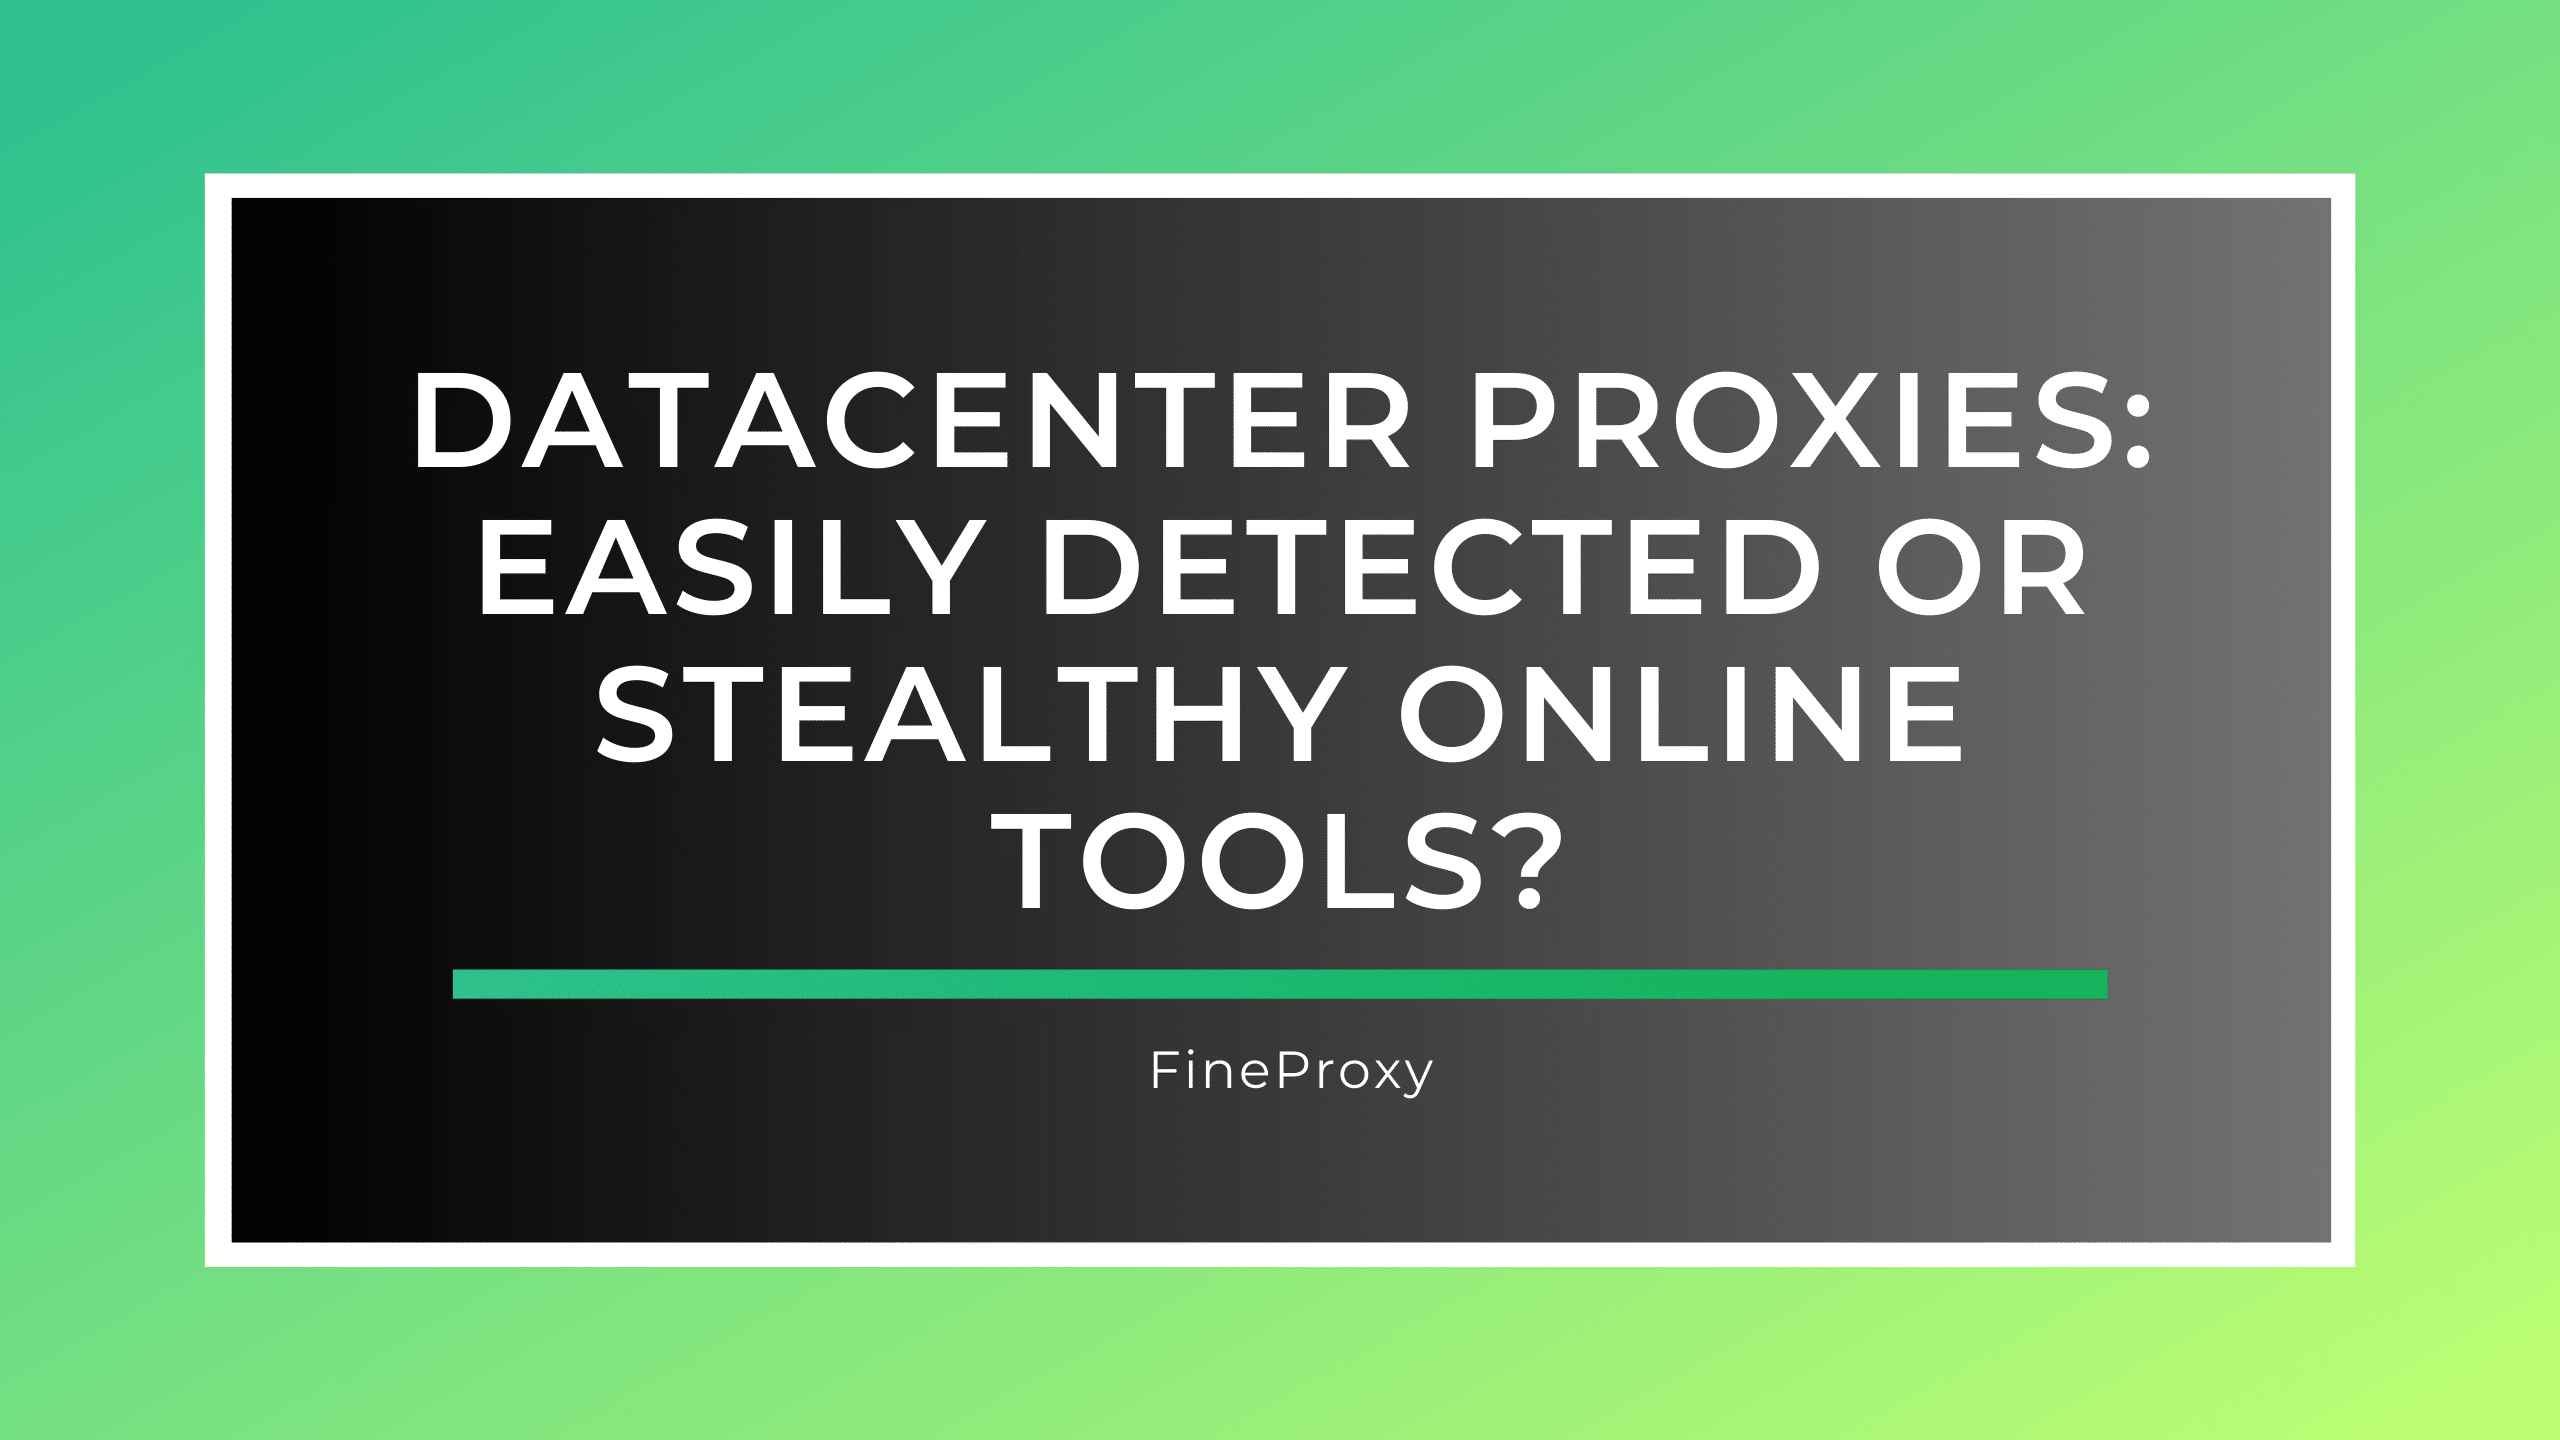 Datacenter Proxies: Easily Detected or Stealthy Online Tools?